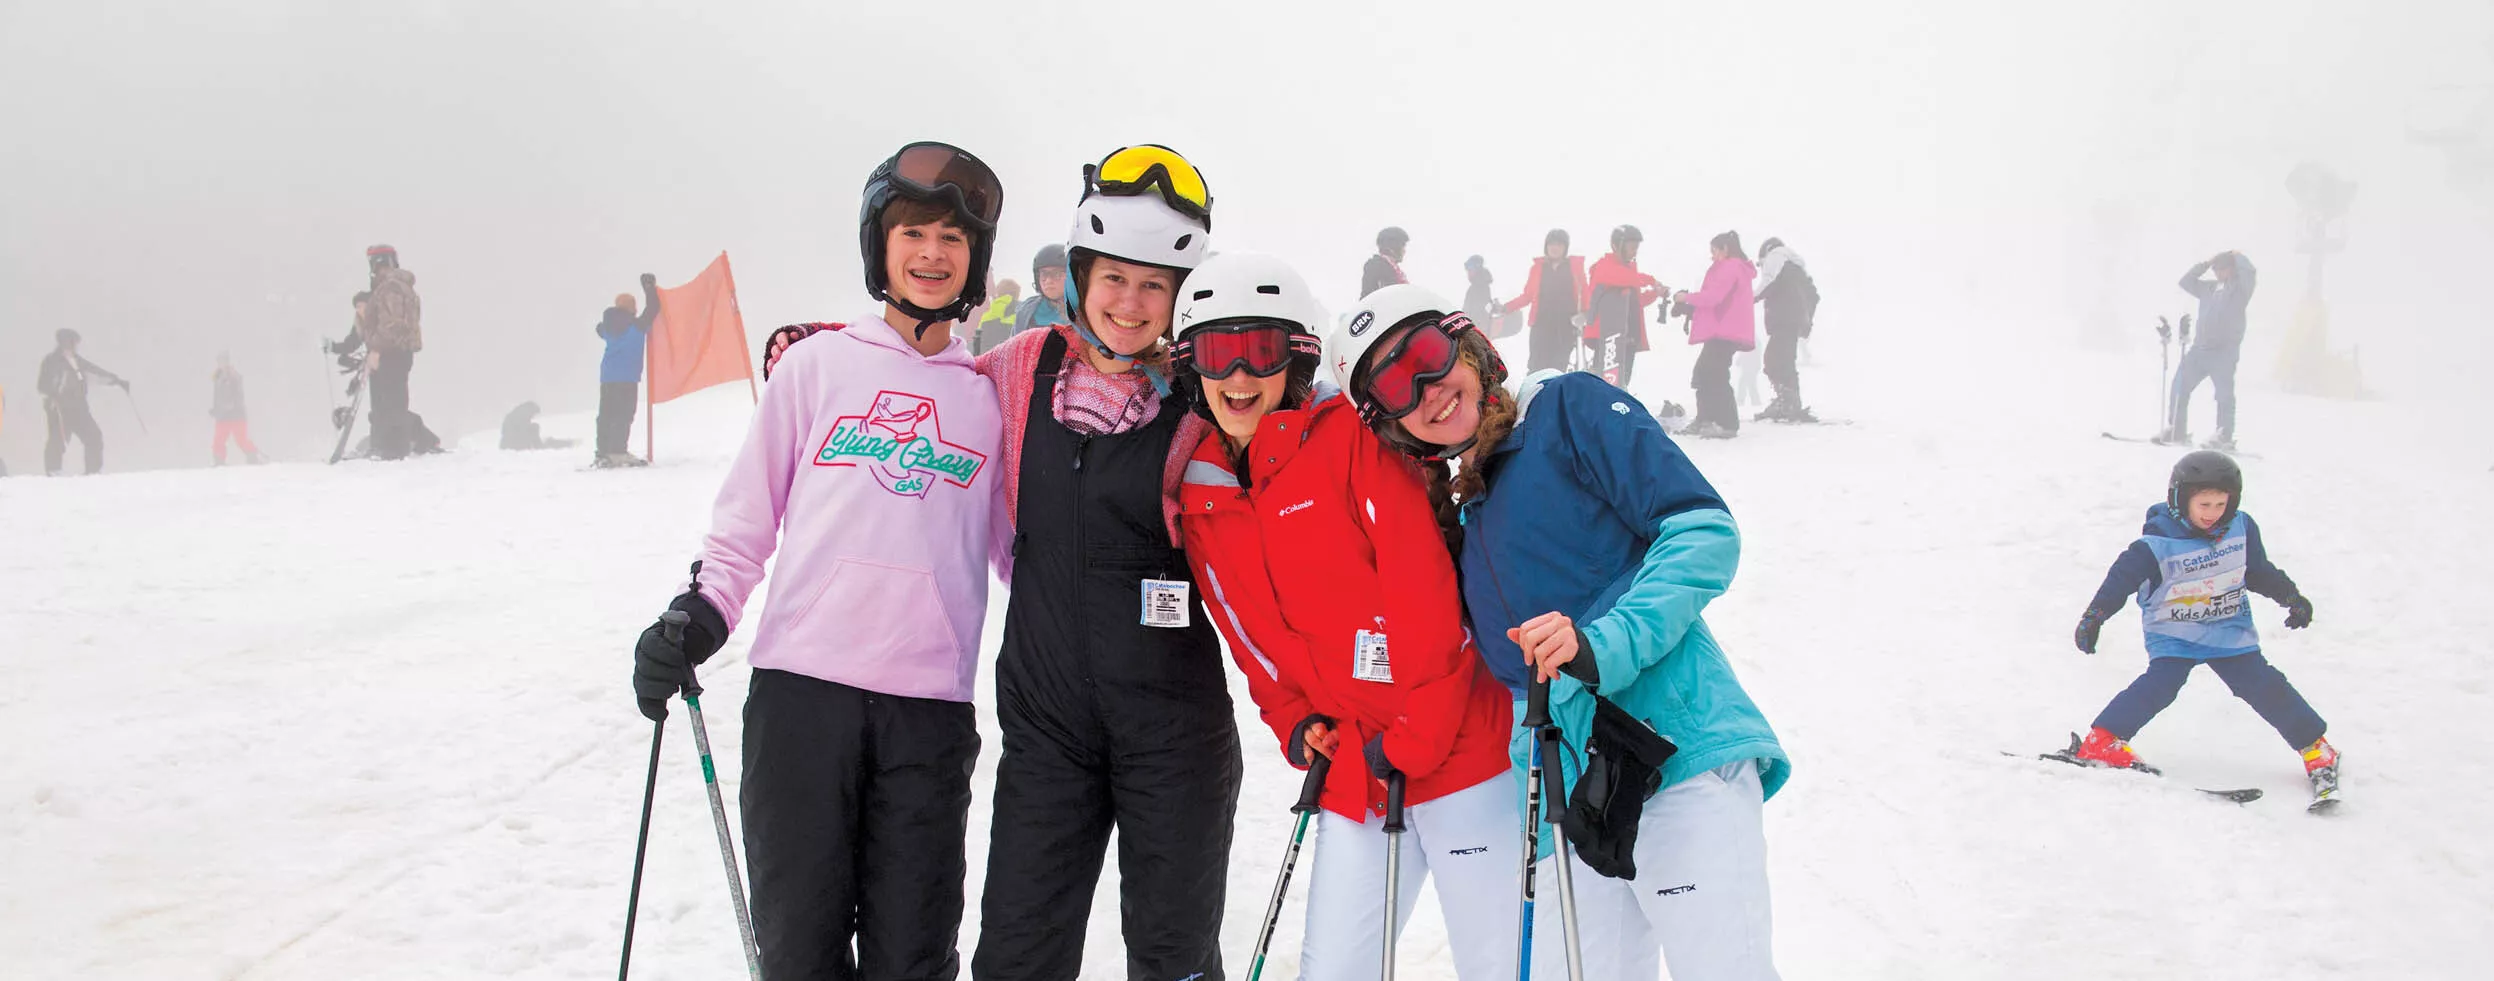 Article>With passion and love,US teen skier switches citizenship